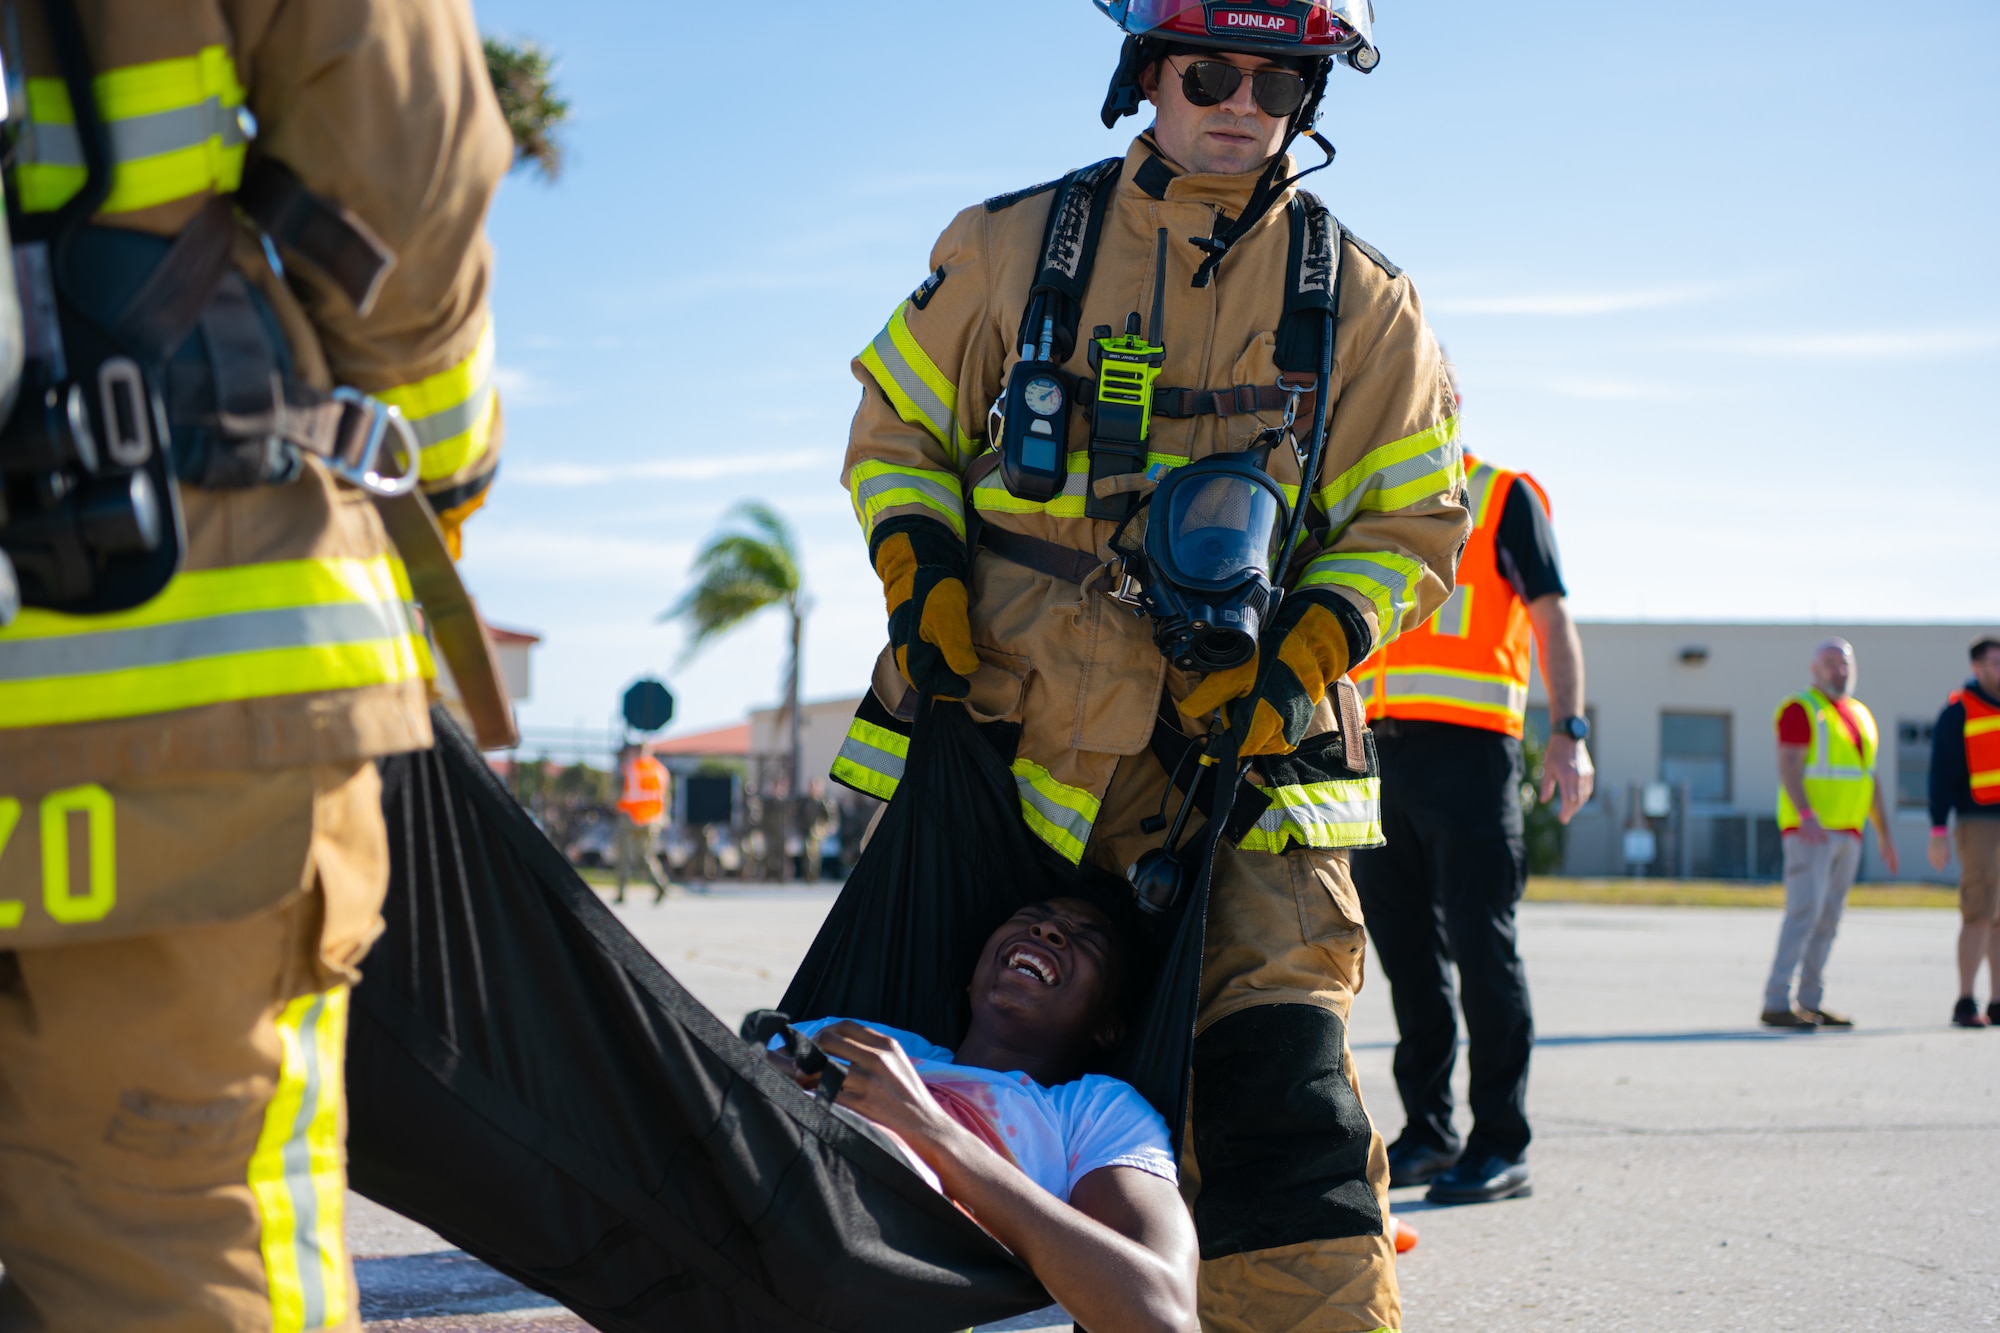 Emergency personnel assigned aid priority to casualties by severity of simulated injury. Categories included immediate evacuation, delayed care, and minimal care. (U.S. Air Force photo by Airman 1st Class Derrick Bole)